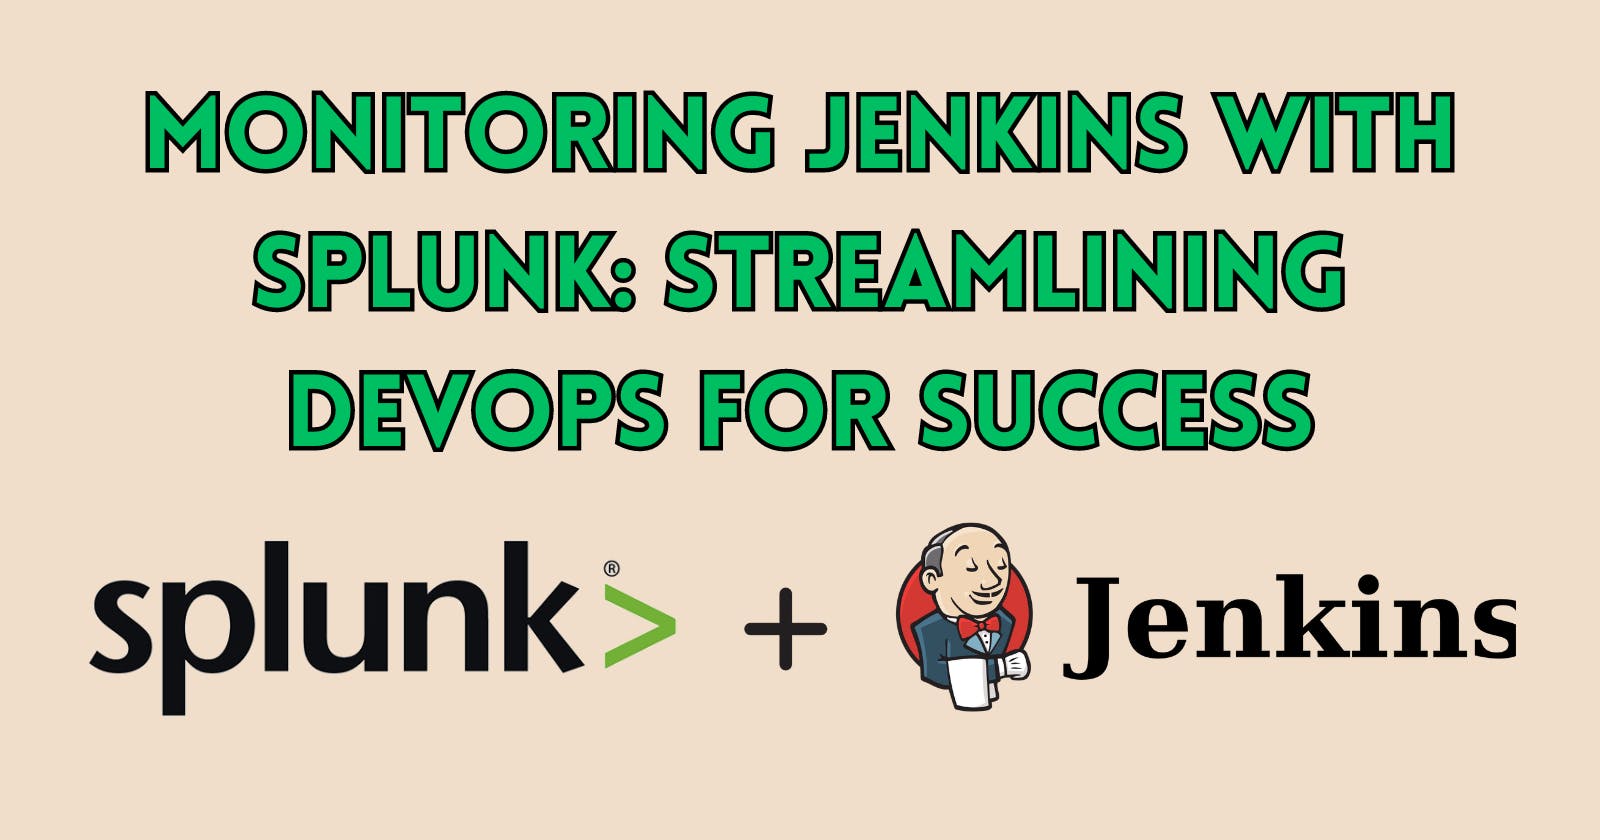 Jenkins and Splunk: Your Path to DevOps, Monitoring, and Data Insights